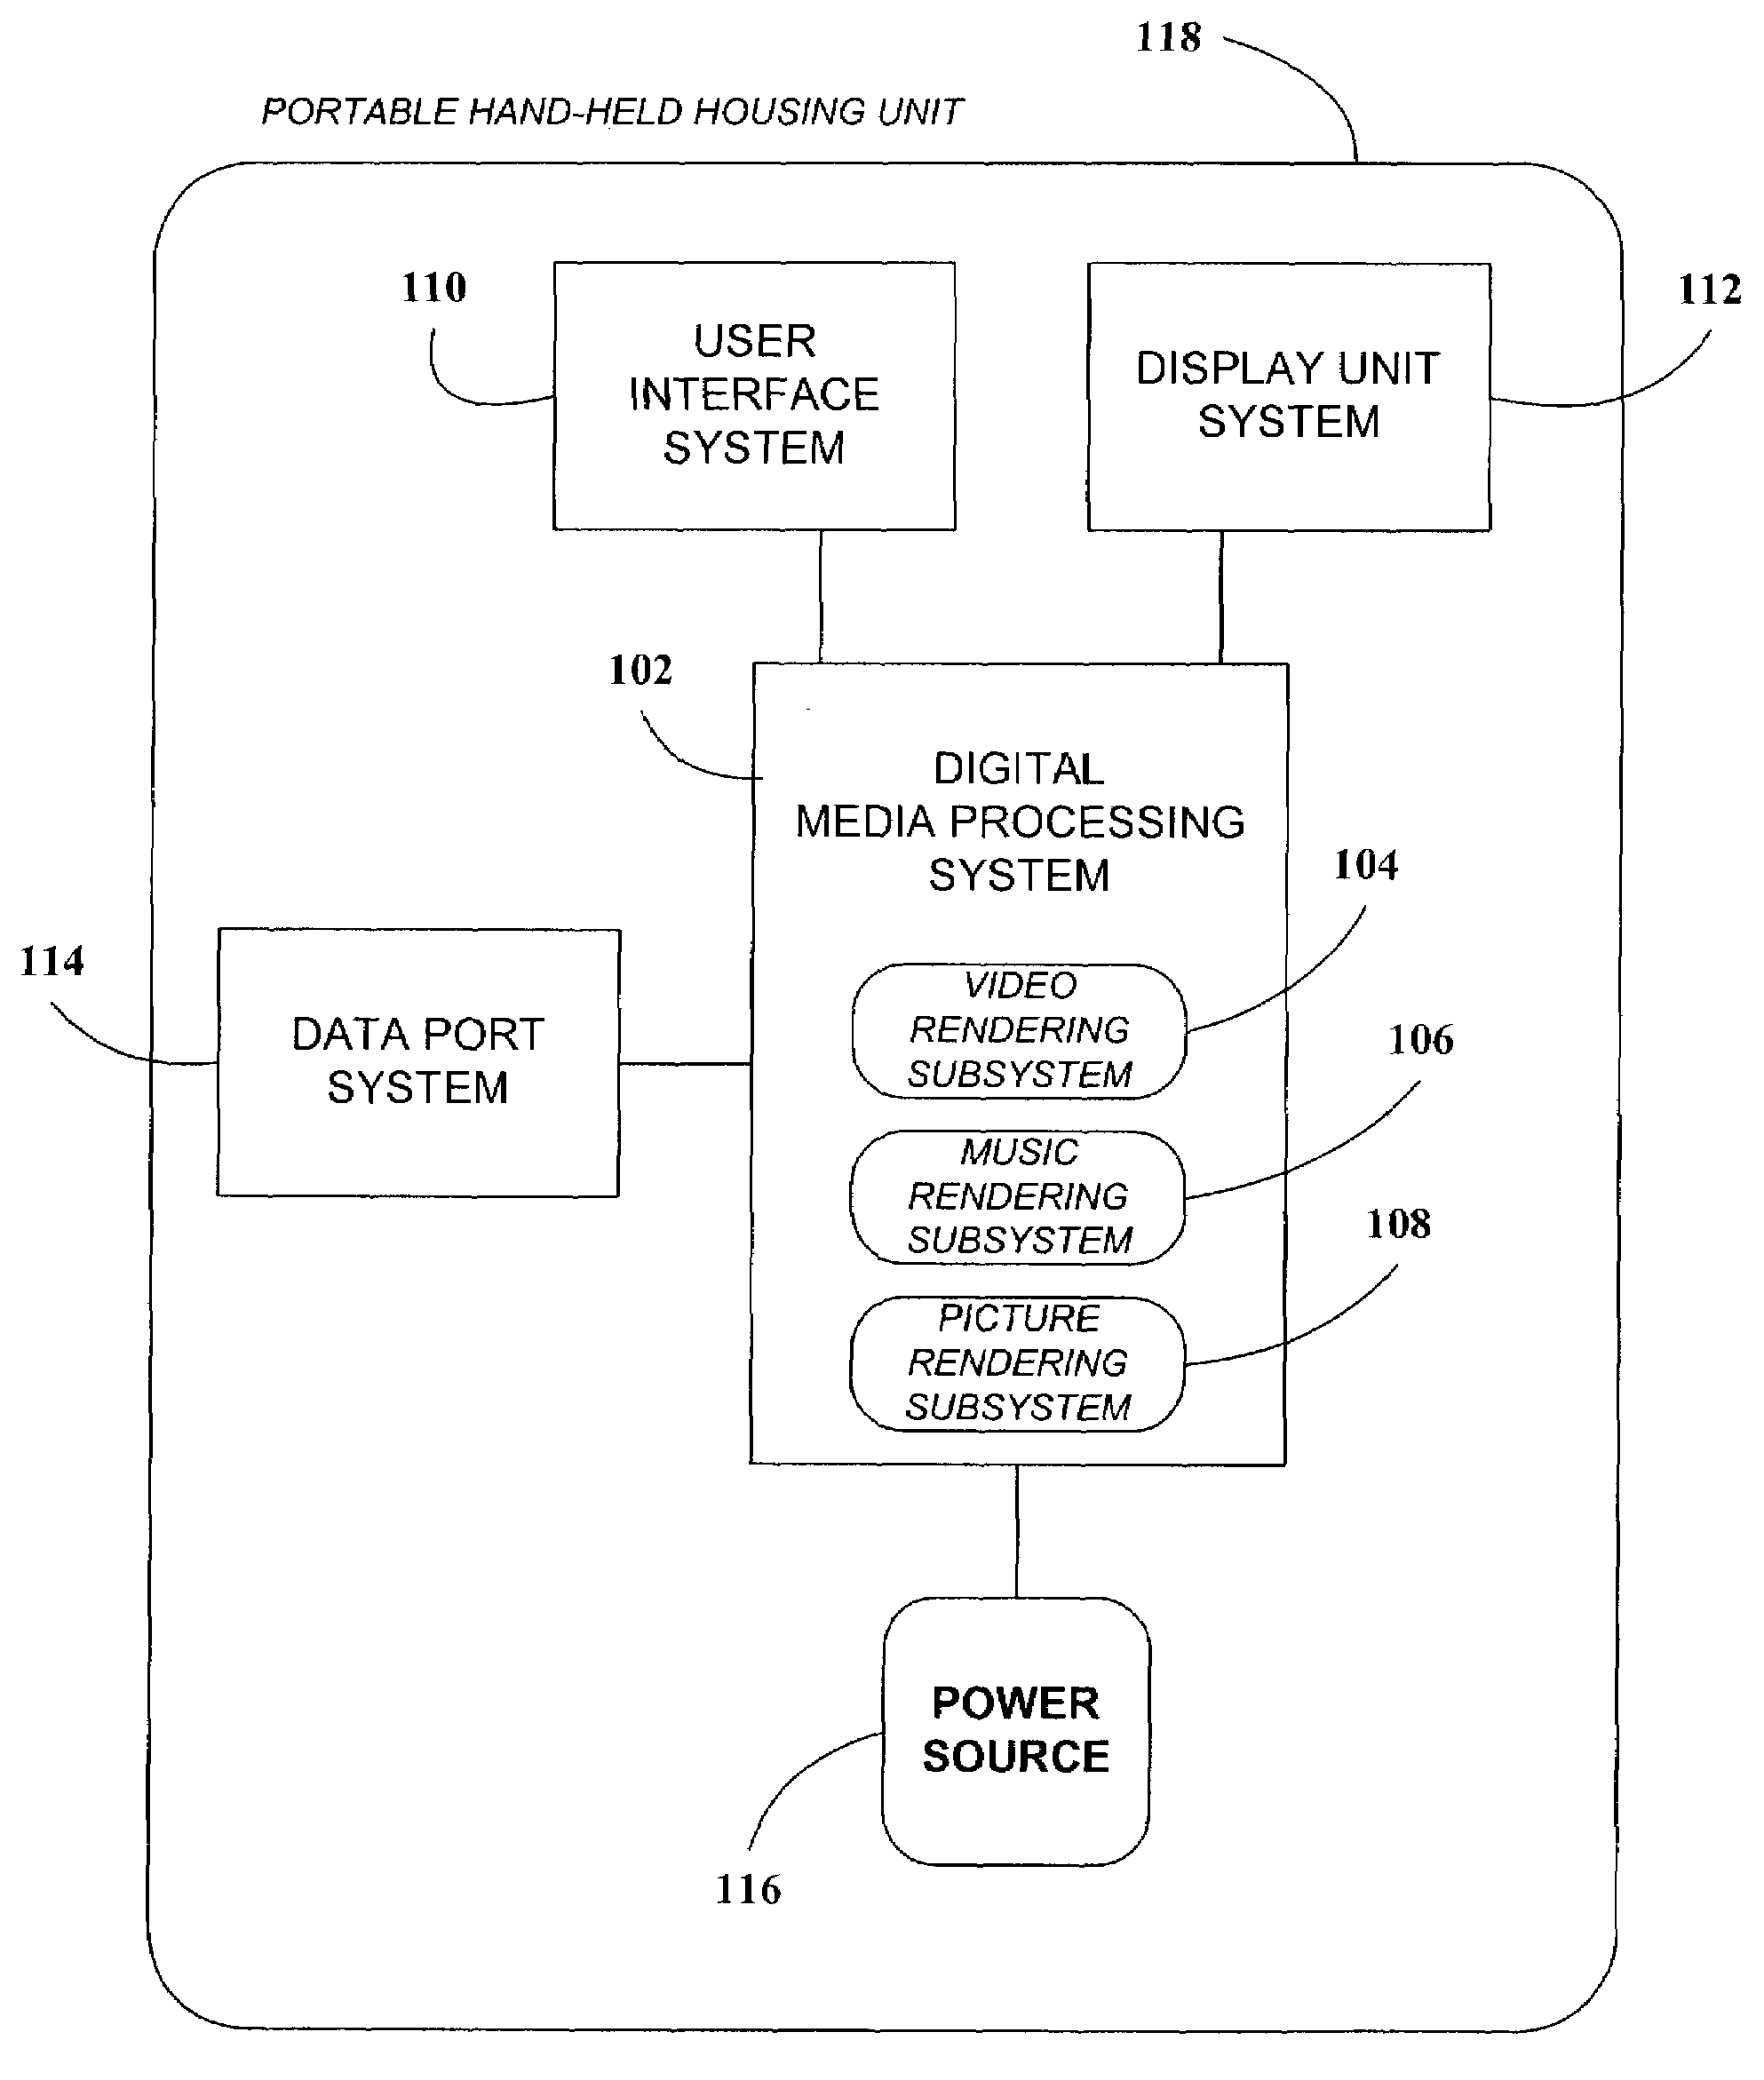 Systems and methods for receiving, storing, and rendering digital video, music, and pictures on a personal media player